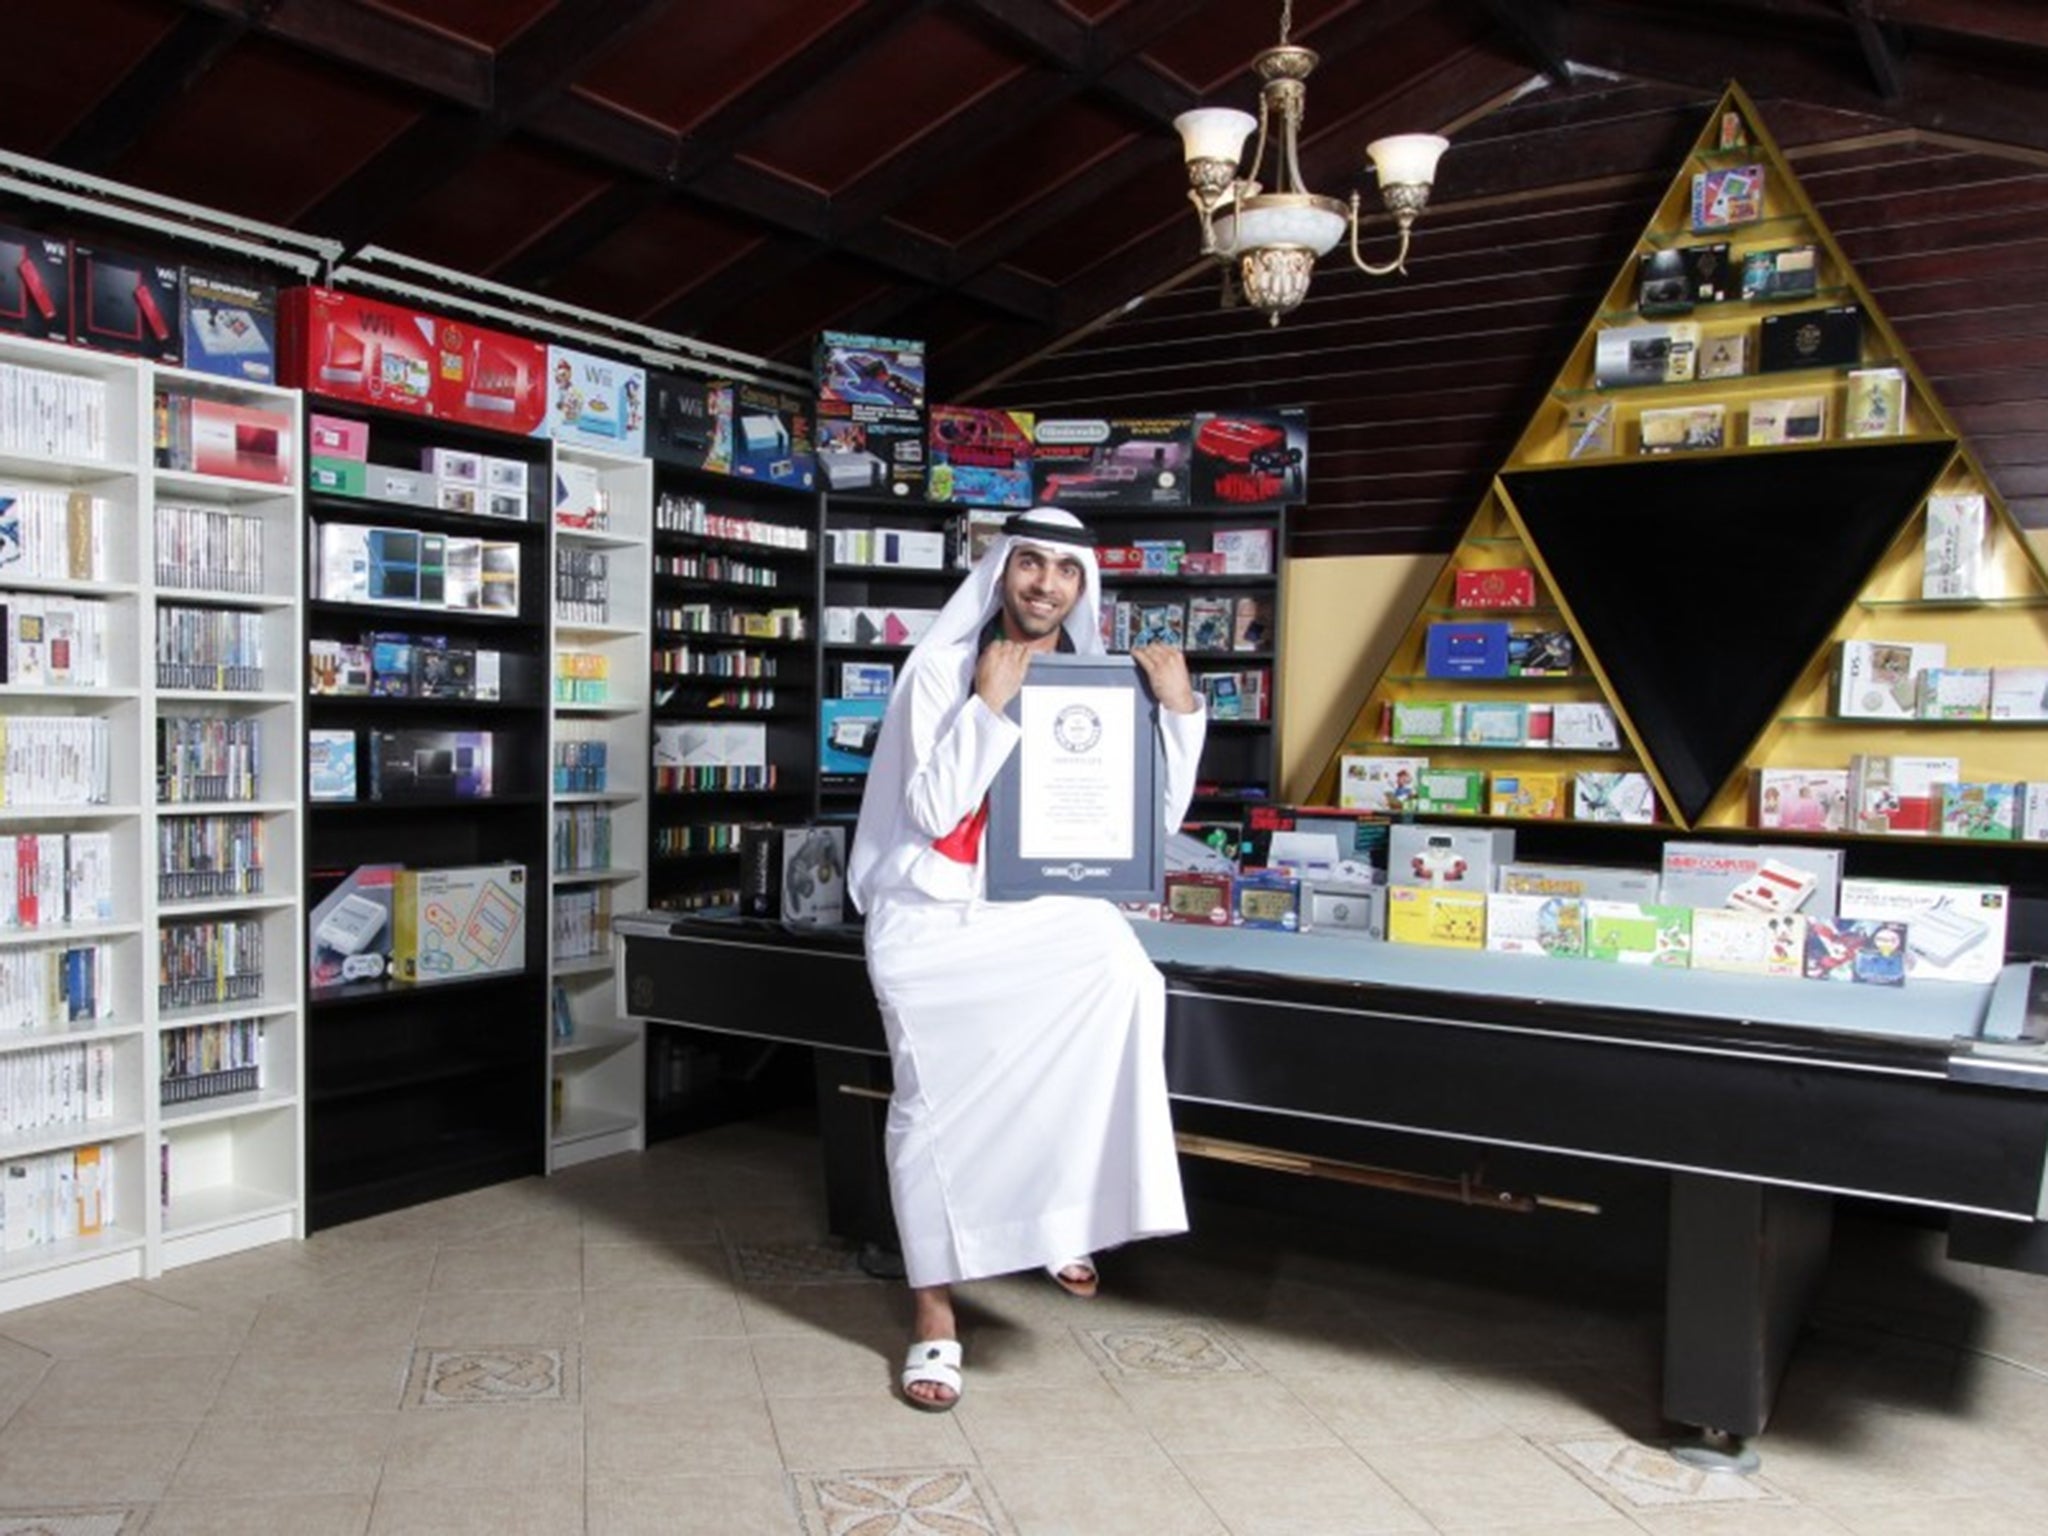 The largest collection of Nintendo Entertainment System paraphernalia belongs to Ahmed Bin Fahad (UAE) and consists of 2,020 items and was verified in Dubai, UAE